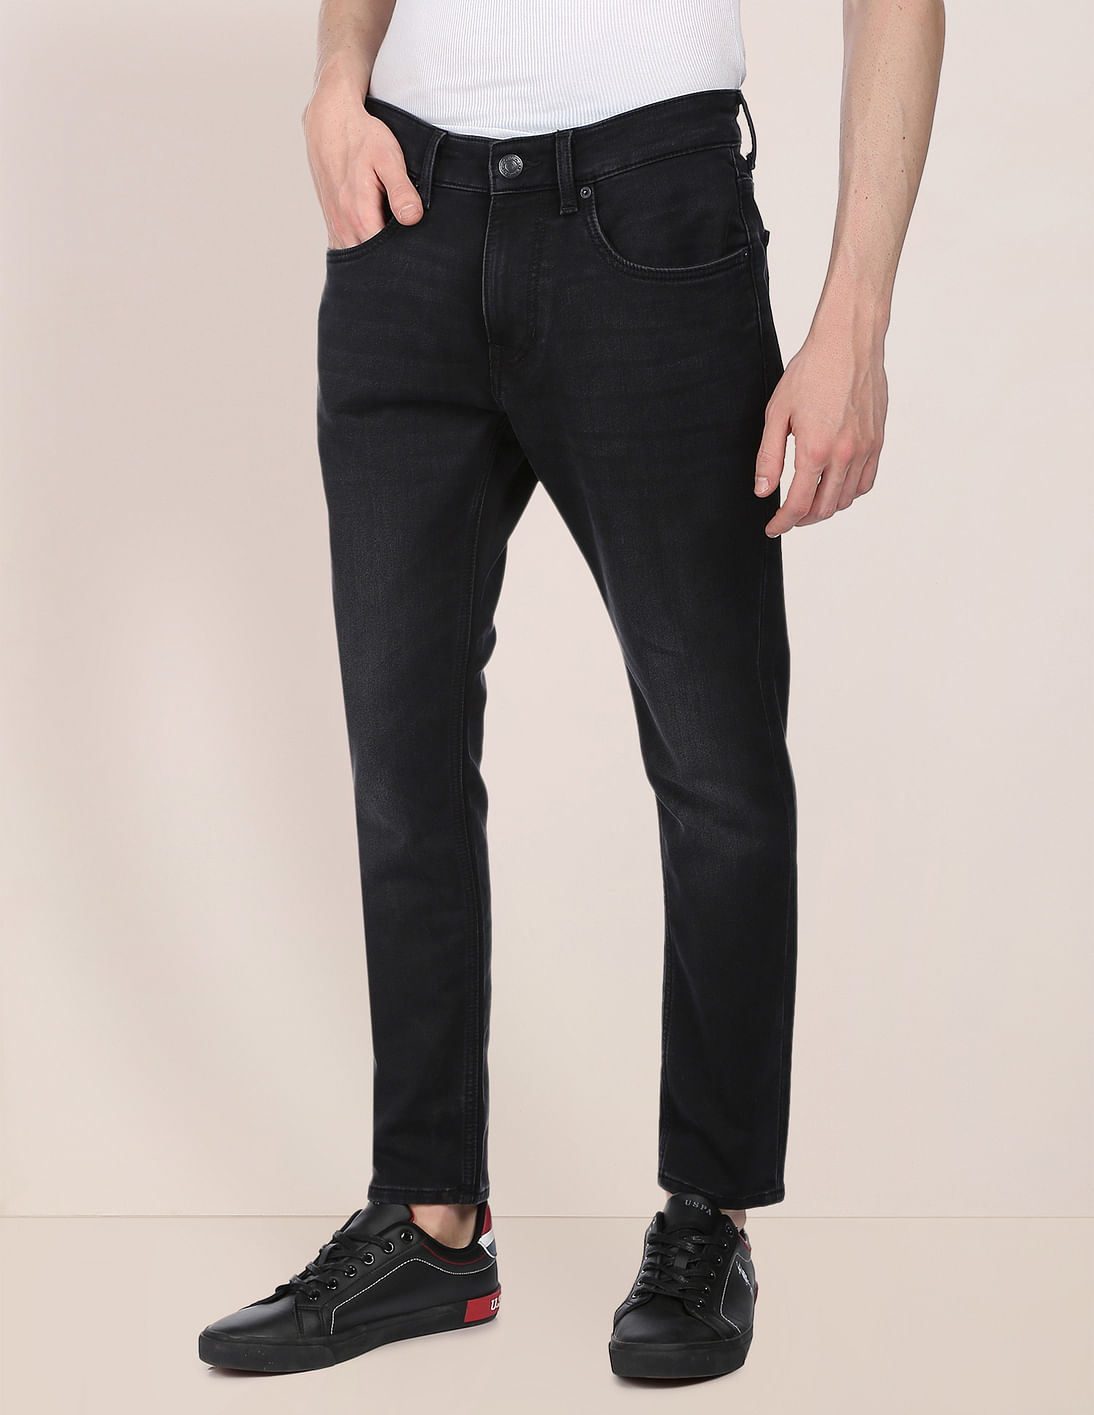 Buy U.S. Polo Assn. Denim Co. Henry Tapered Cropped Fit Black Jeans ...